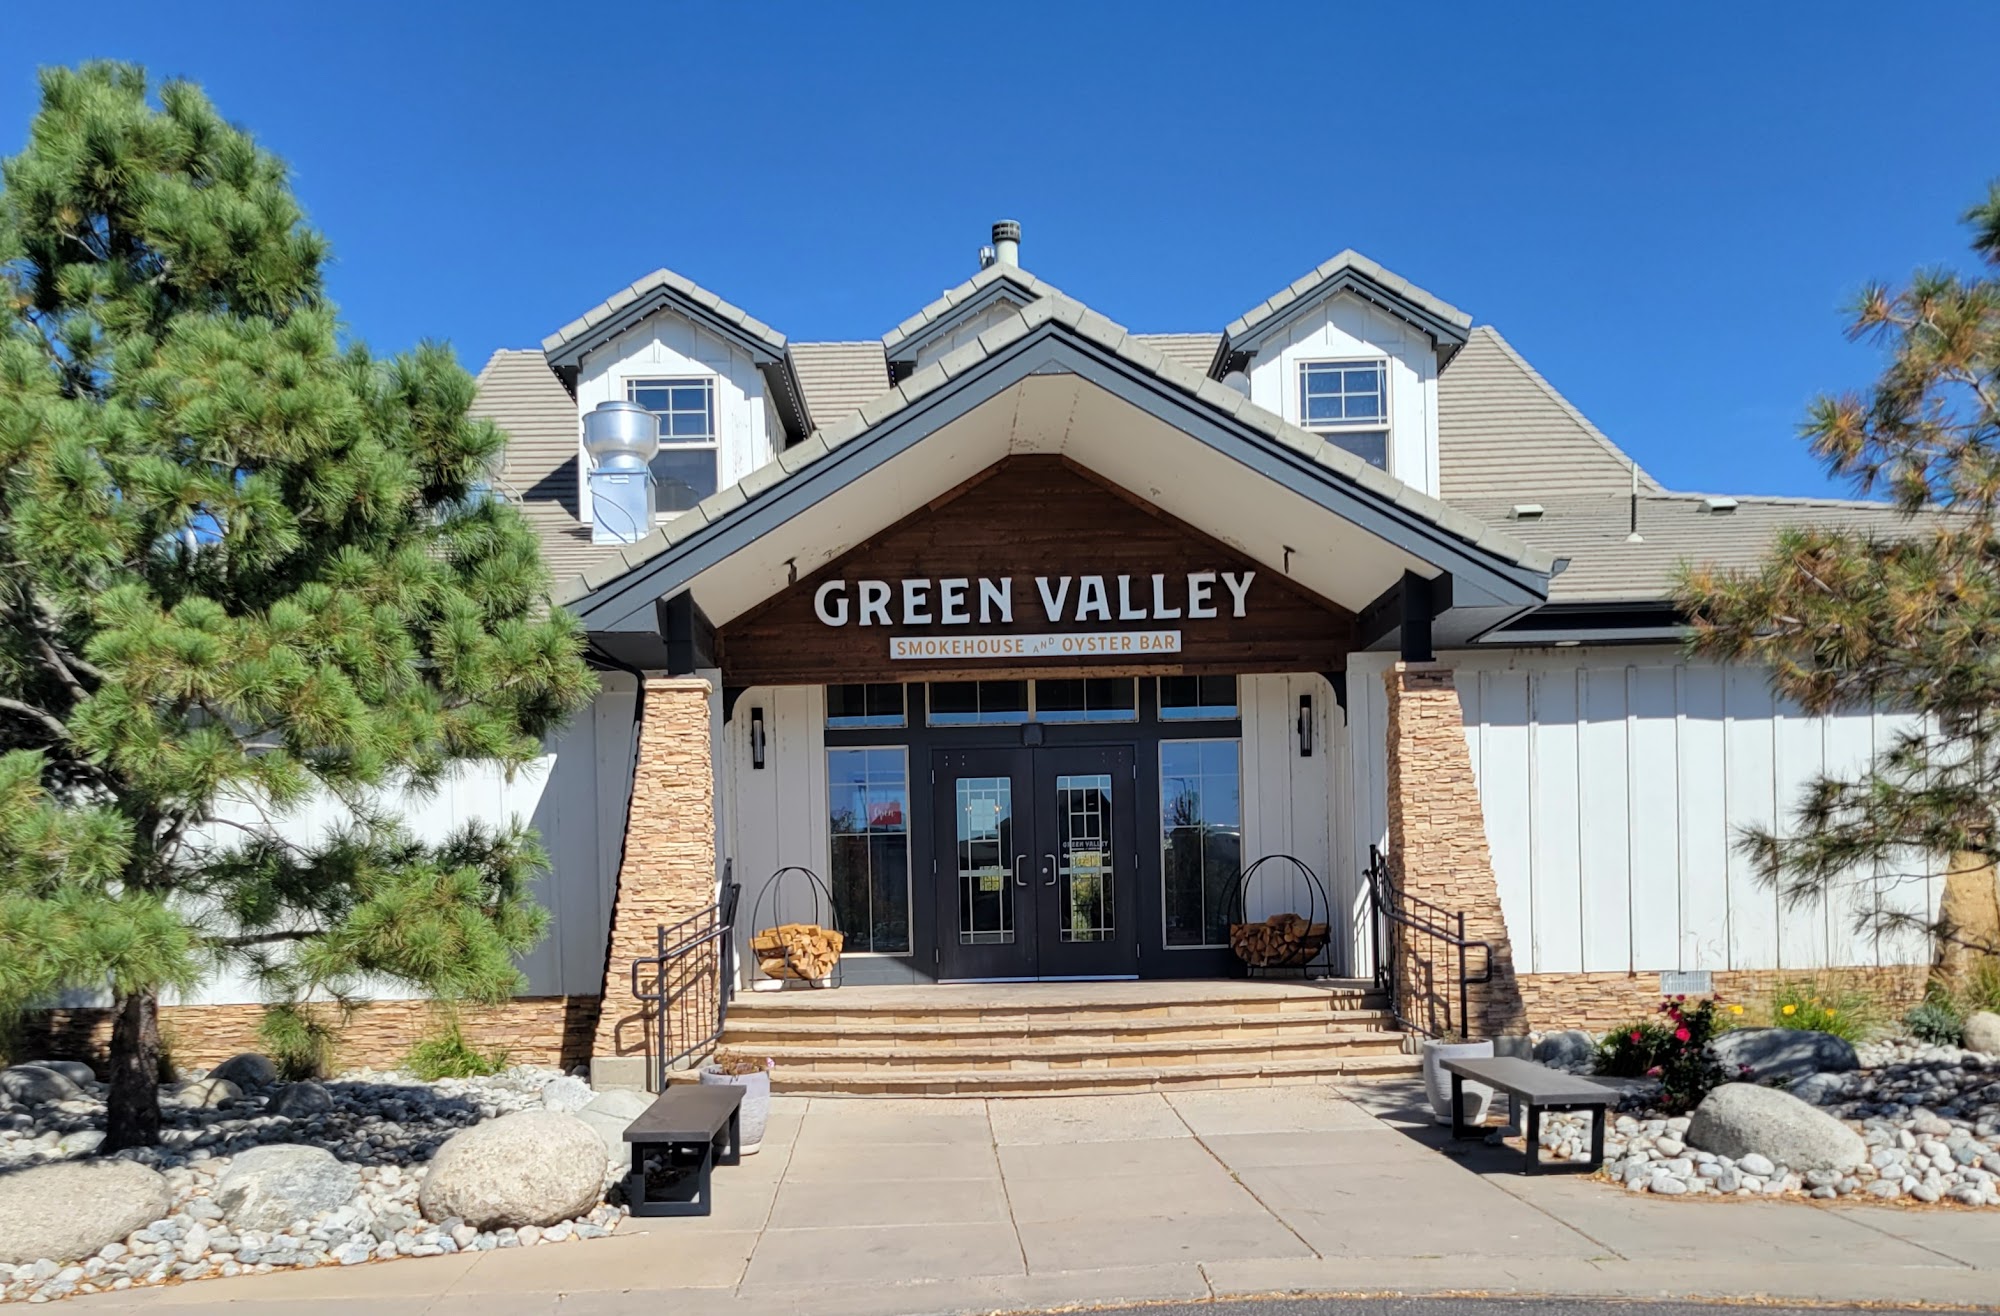 Green Valley Smokehouse and Oyster Bar